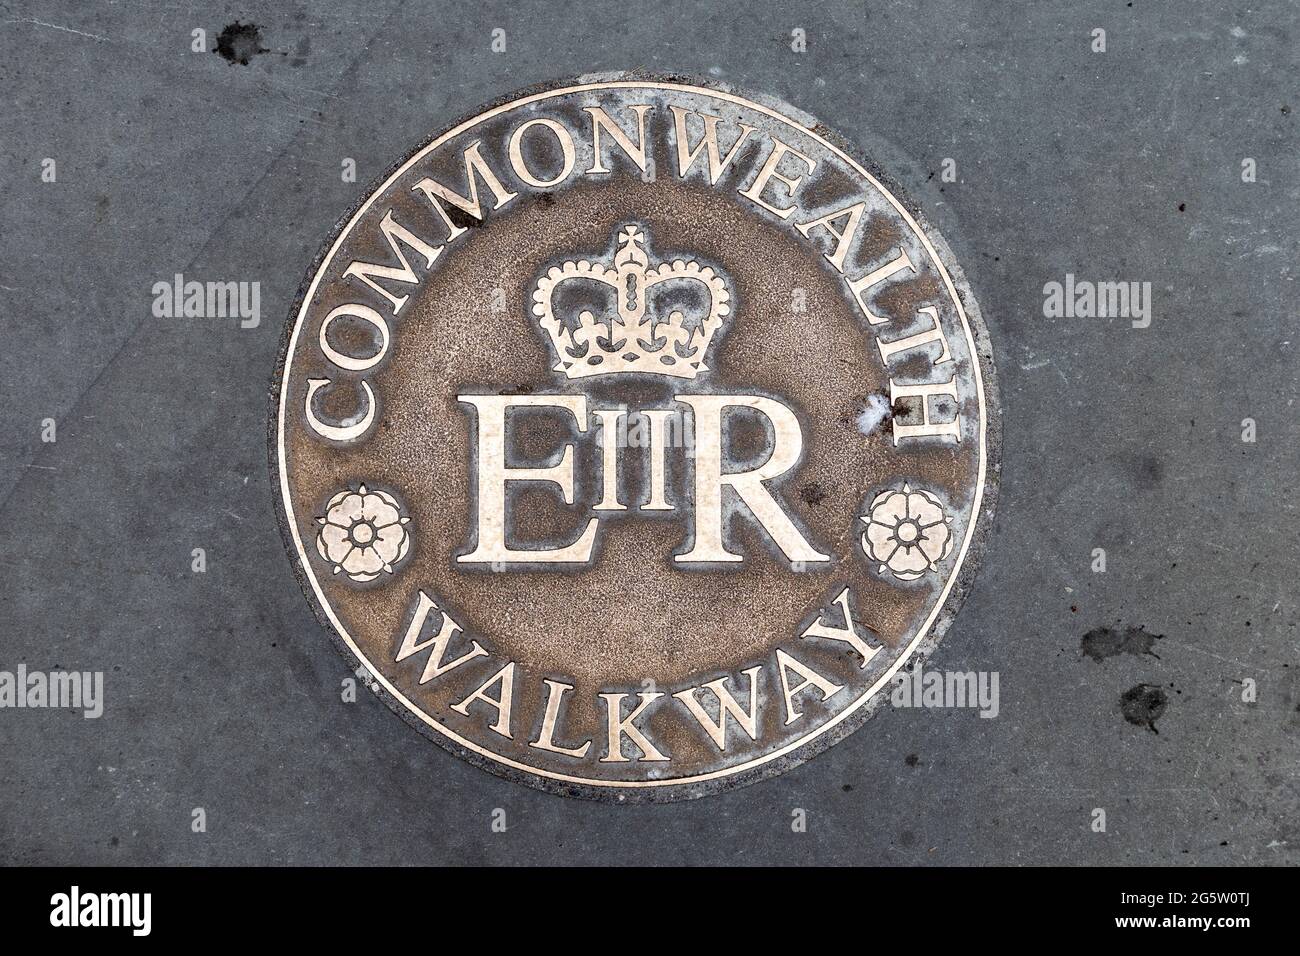 Plaque for the London Commonwealth Walkway in the pavement on the Strand, London, UK Stock Photo